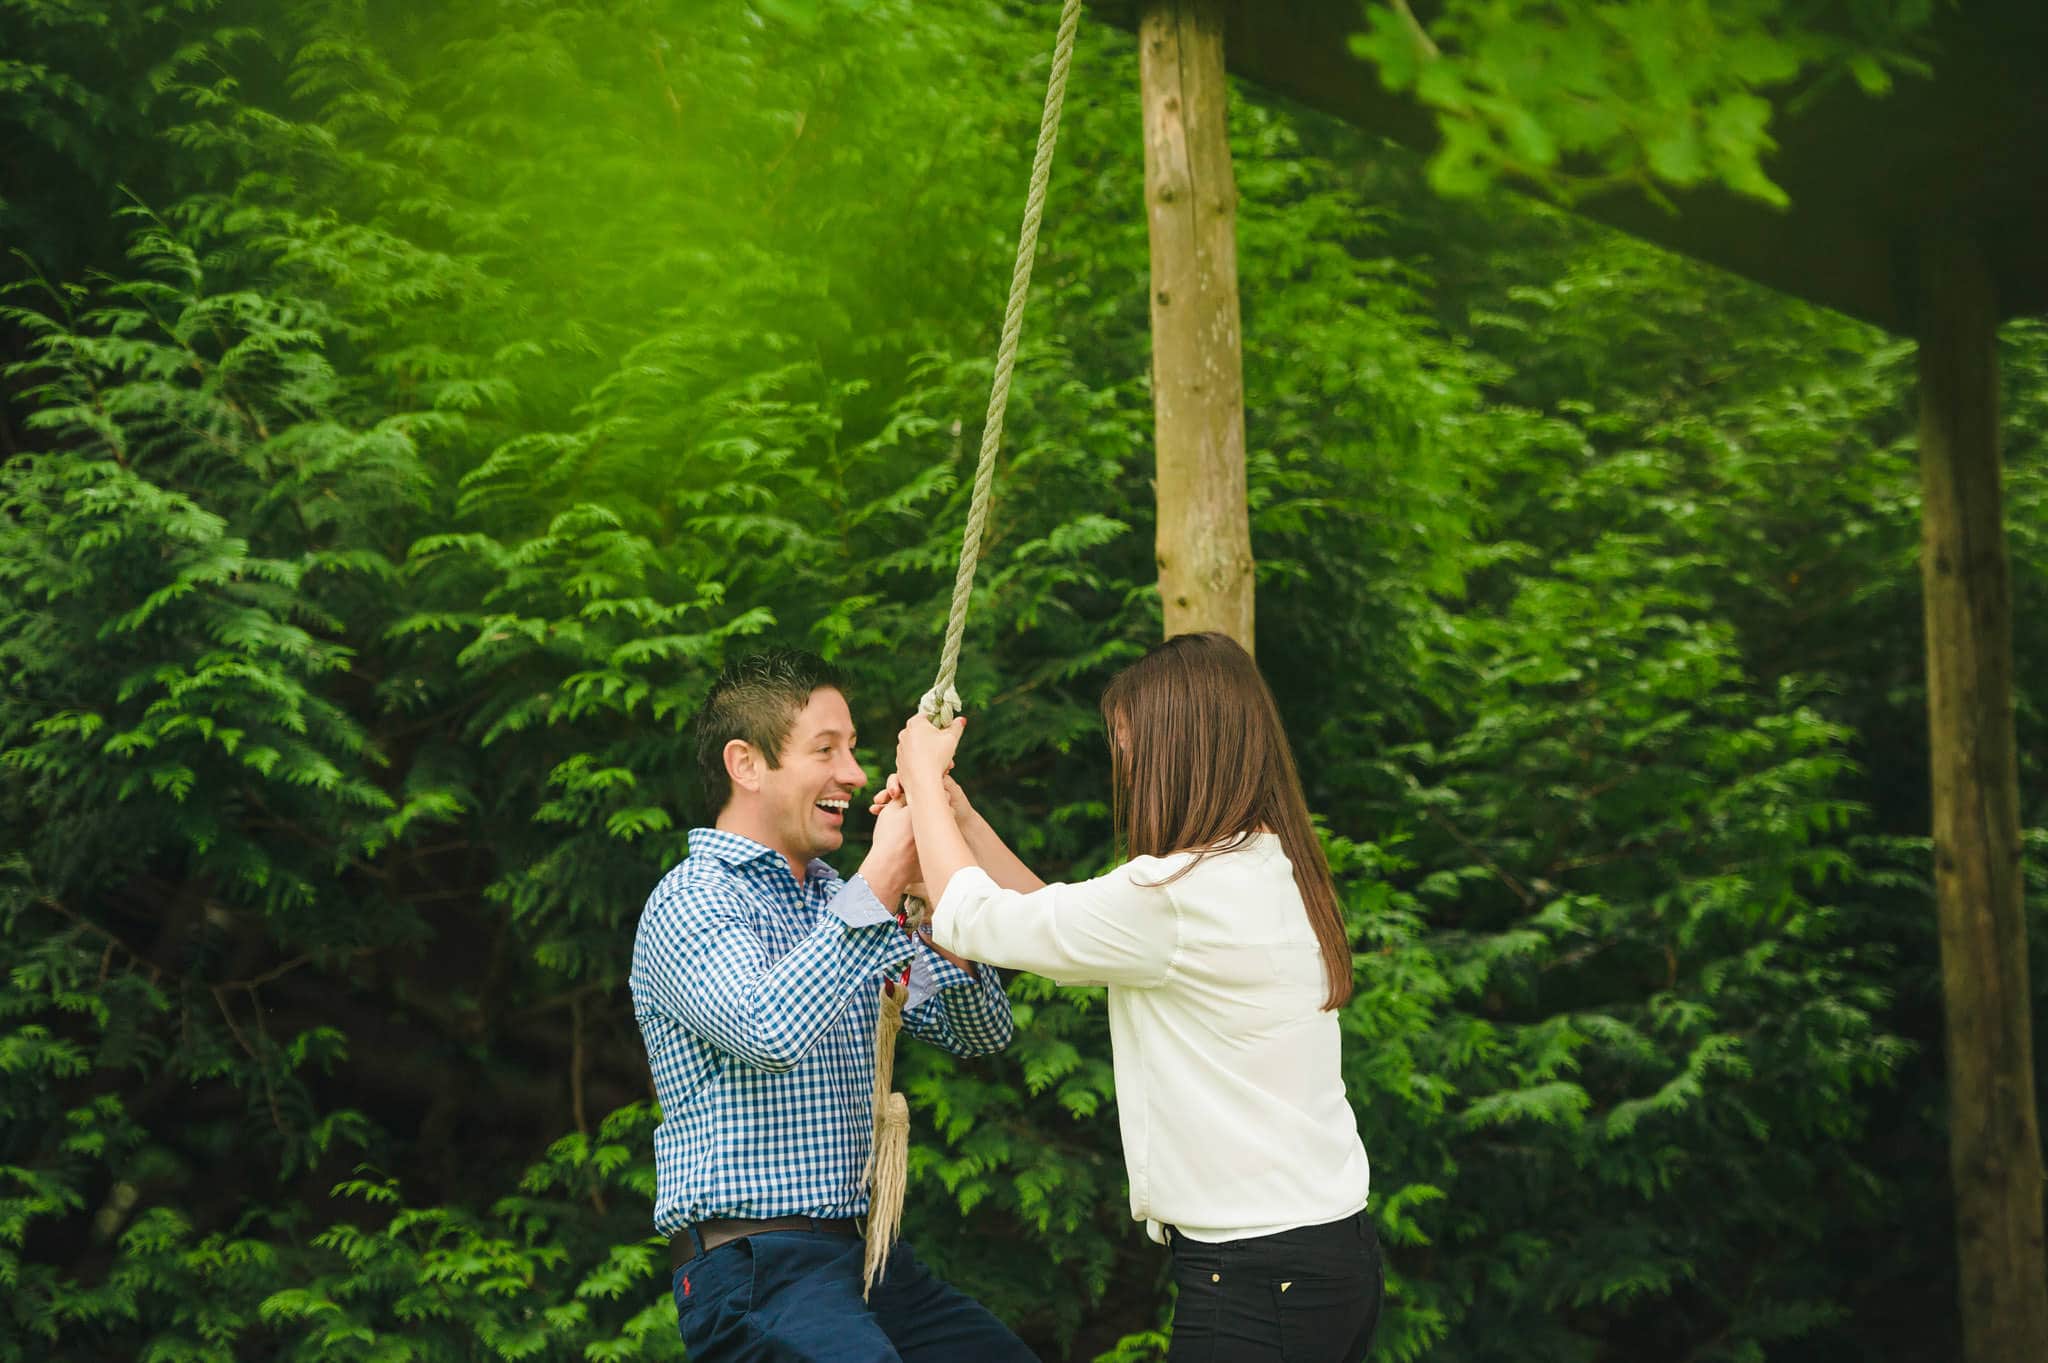 Dean + Sarah's pre wedding photography session in Herefordshire, West Midlands 1